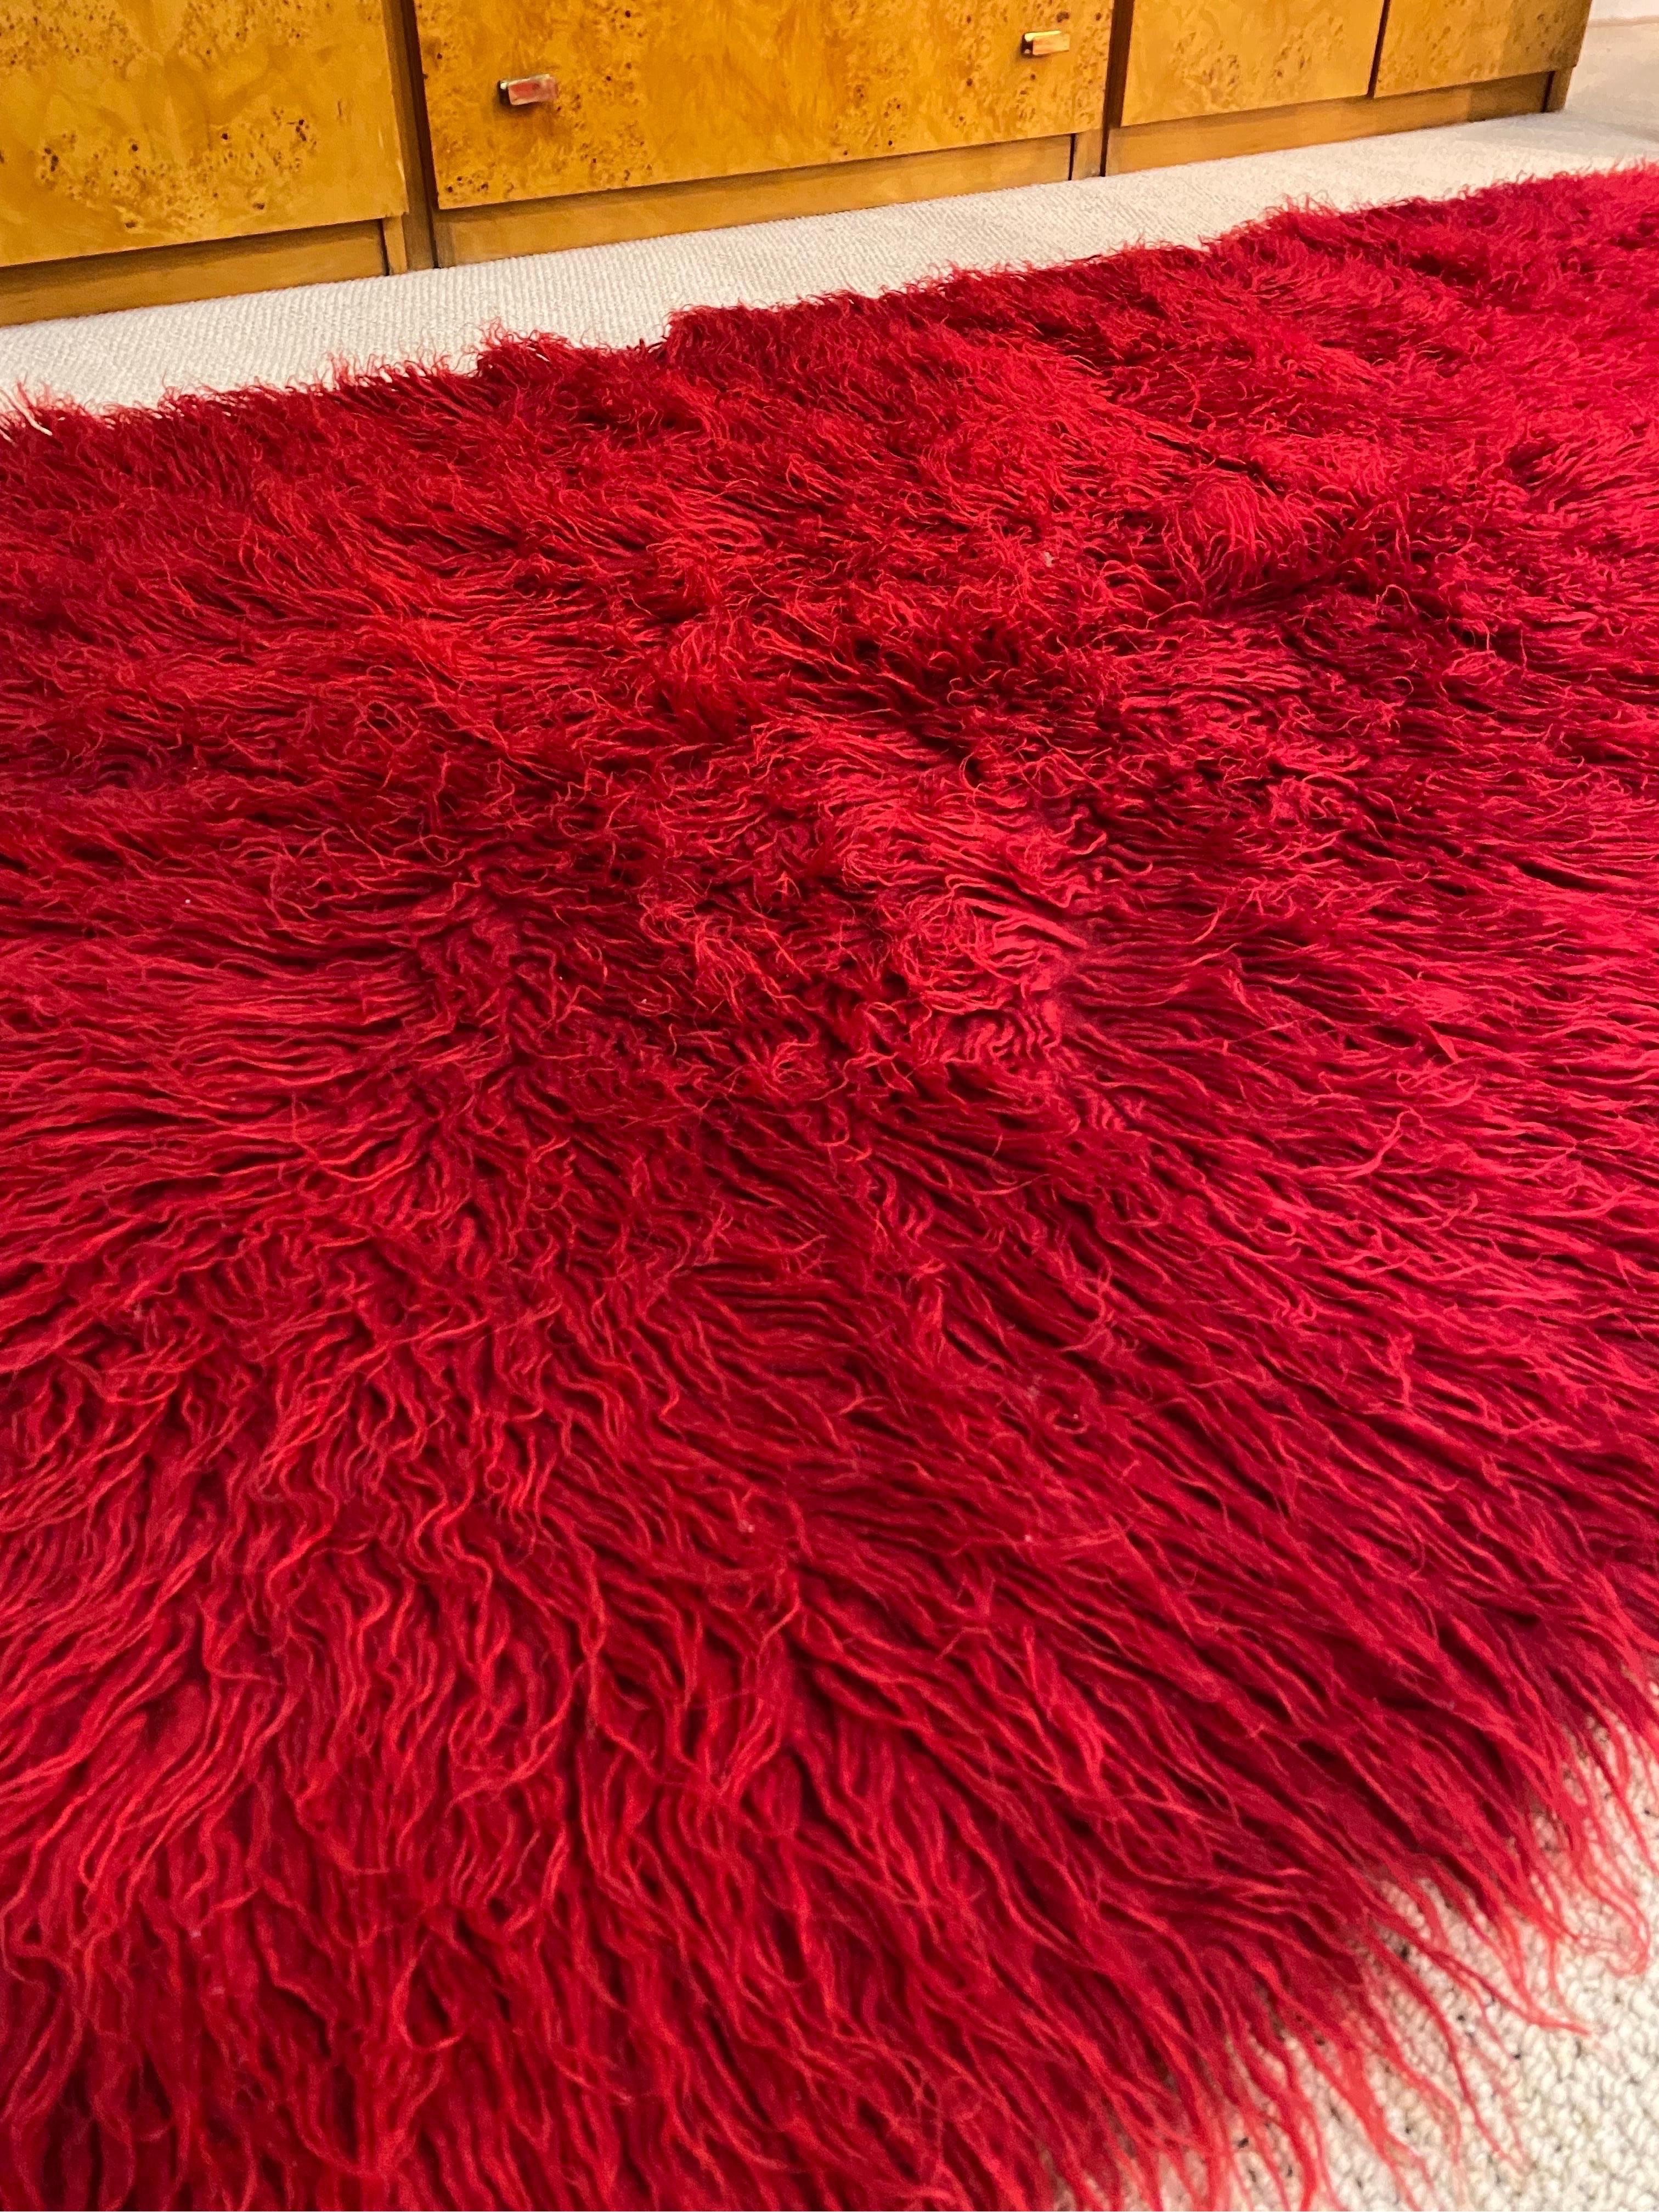 1960s Wool Handwoven Red Rug Vintage Retro Folk Art Carpet Throw  In Good Condition For Sale In London, GB